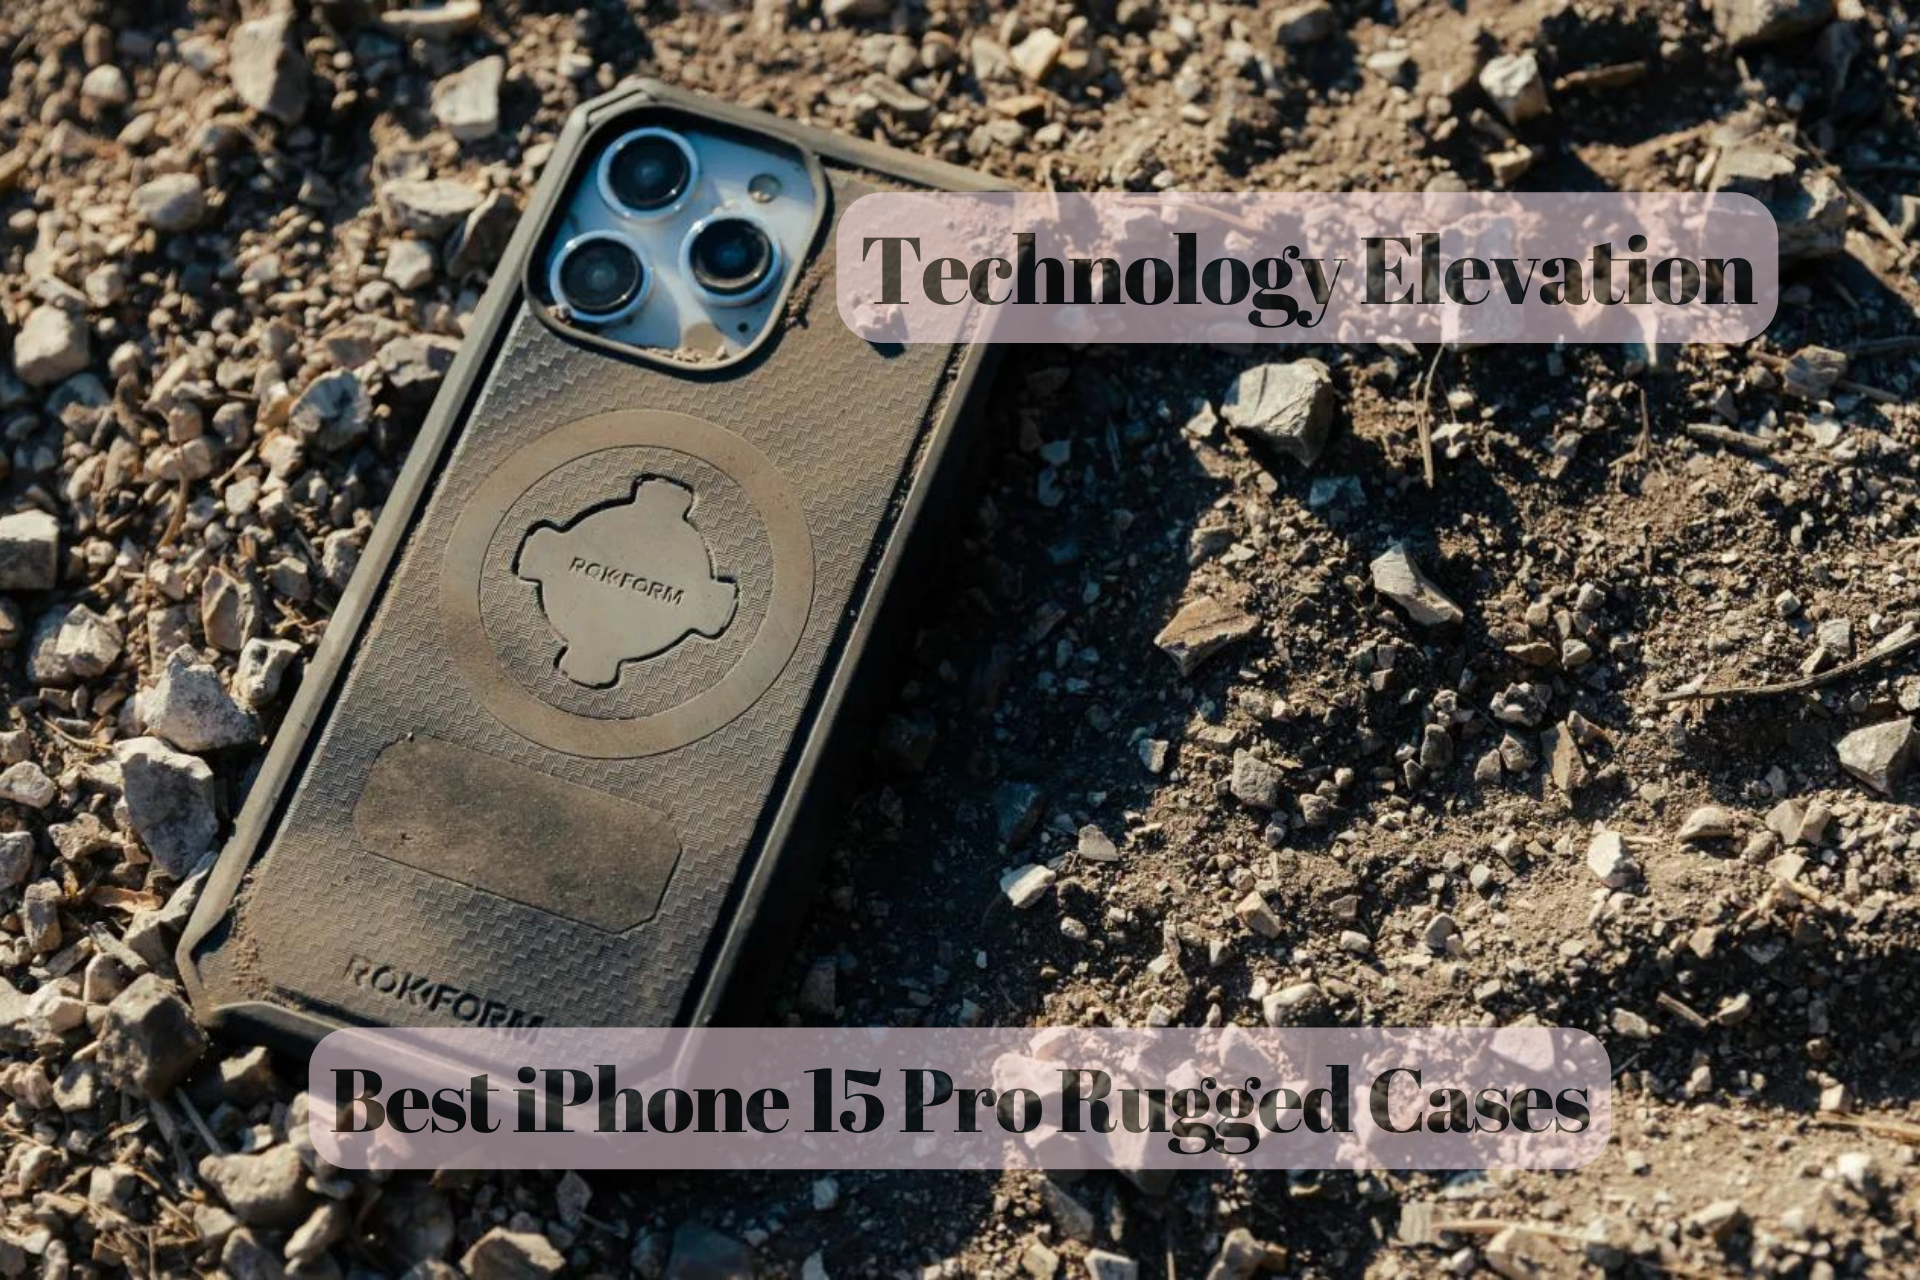 Best iPhone 15 Pro Rugged Cases